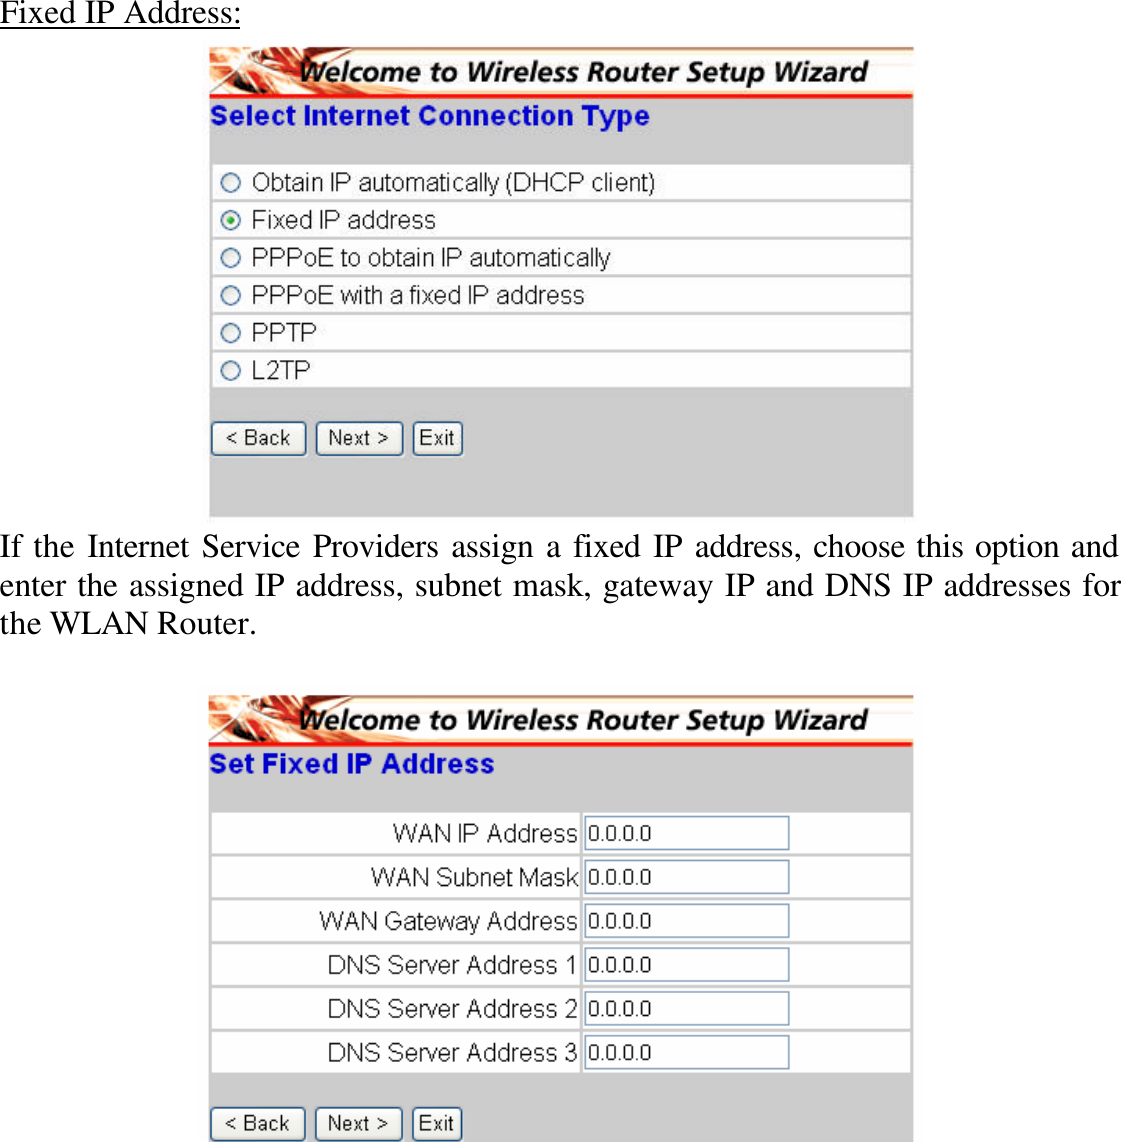 Fixed IP Address:  If the Internet Service Providers assign a fixed IP address, choose this option and enter the assigned IP address, subnet mask, gateway IP and DNS IP addresses for the WLAN Router.    